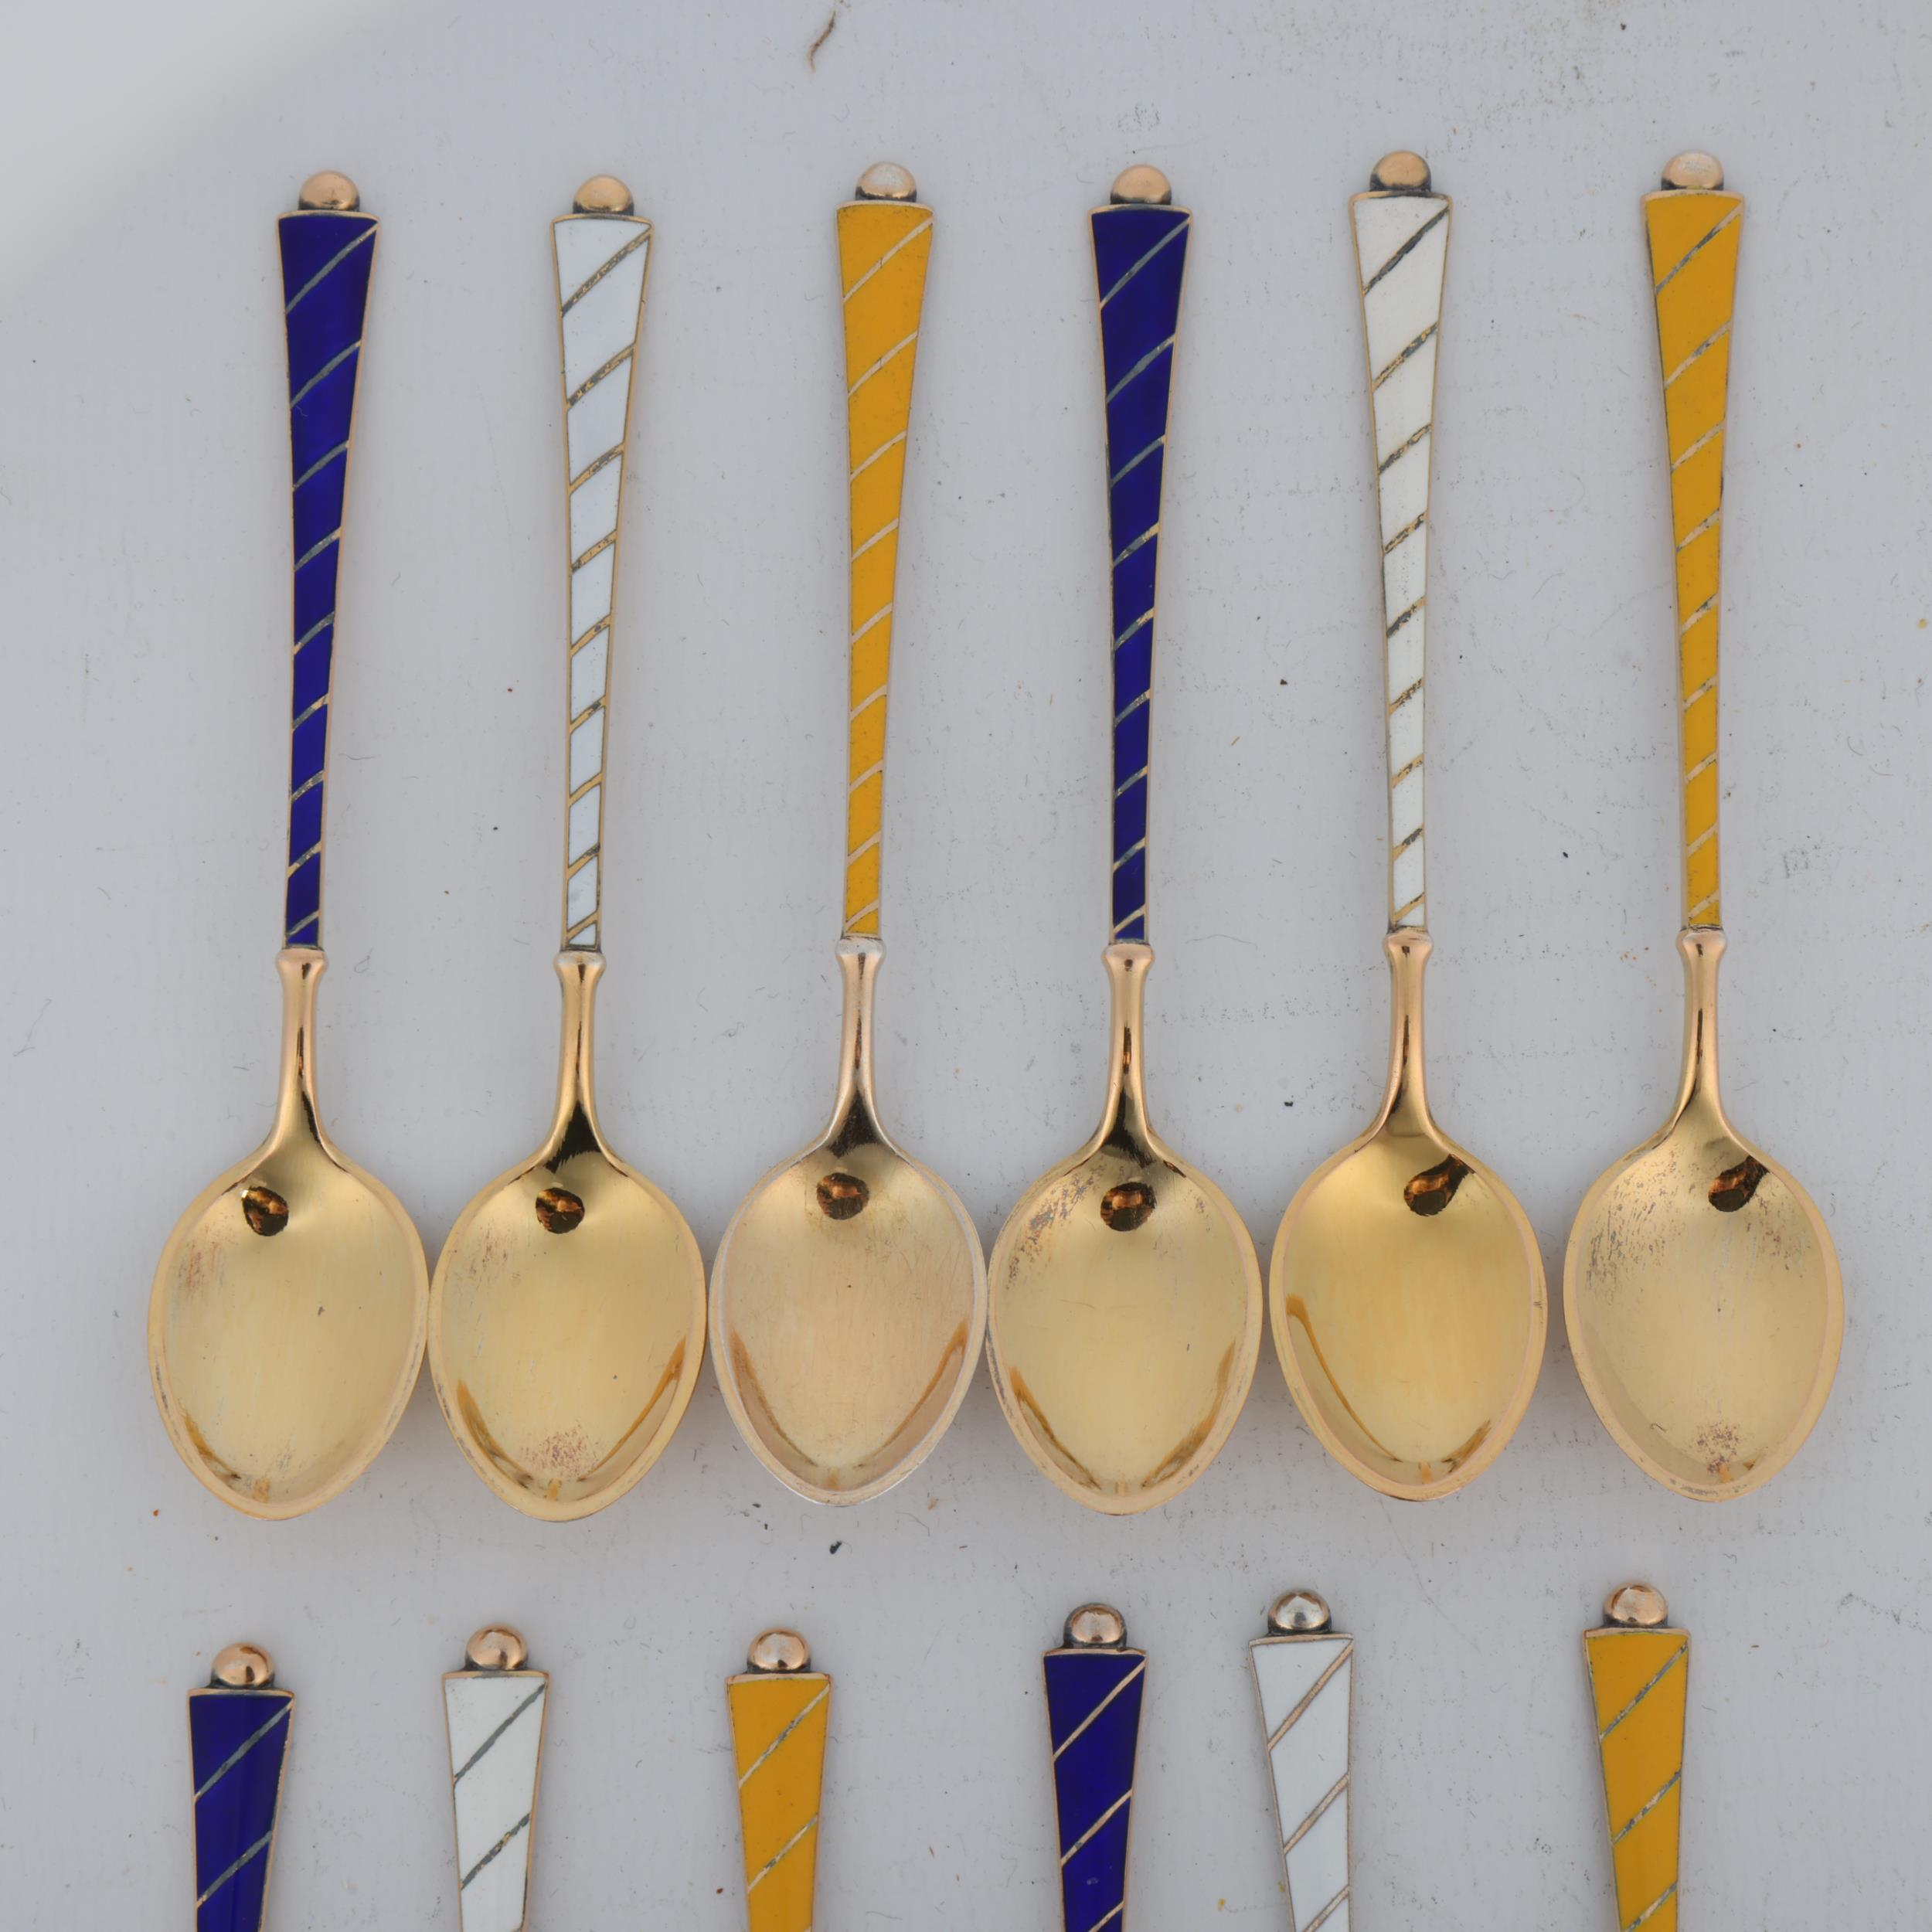 EGON LAURIDSEN - a set of 12 Danish vermeil sterling silver and three-colour enamel coffee spoons, - Image 2 of 3